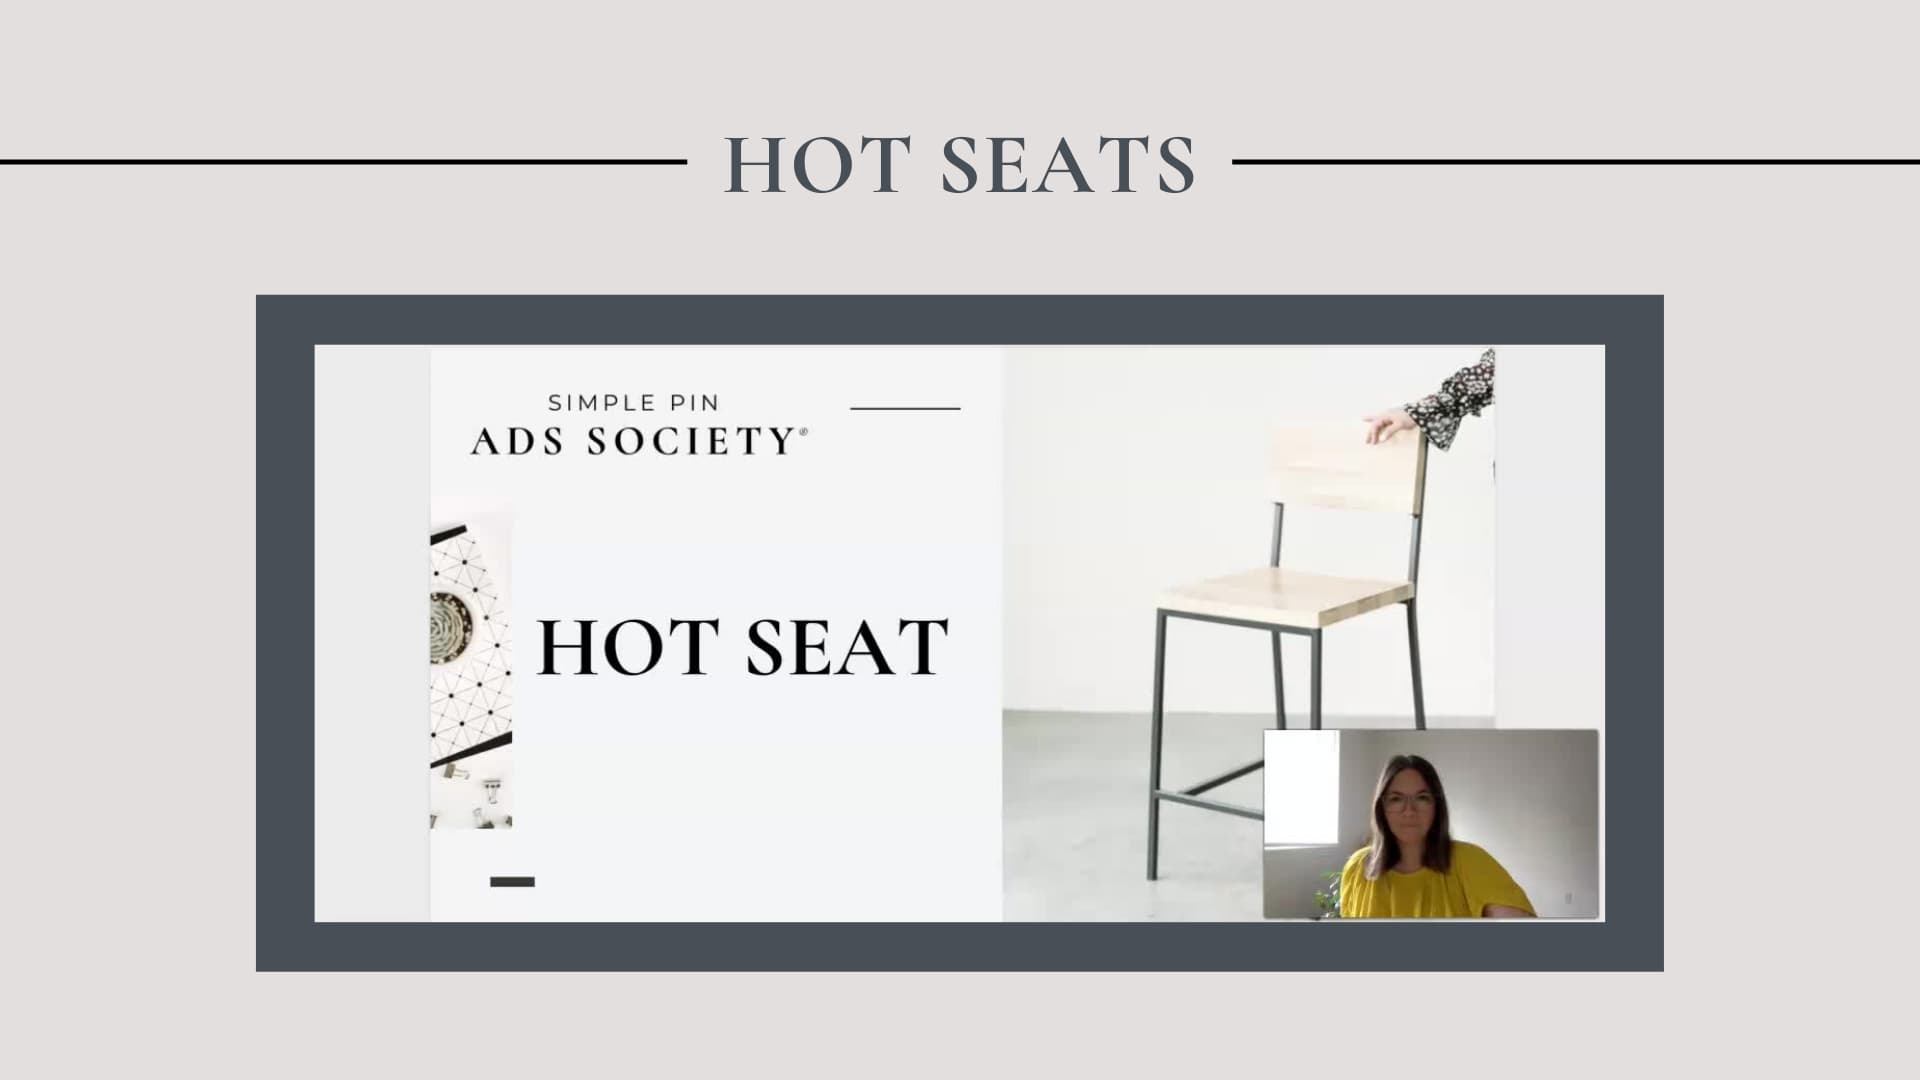 Image of a wood chair with black legs, and image text that reads "Simple Pin Ad Society Hot Seat", and an inset image of a woman on a video call.